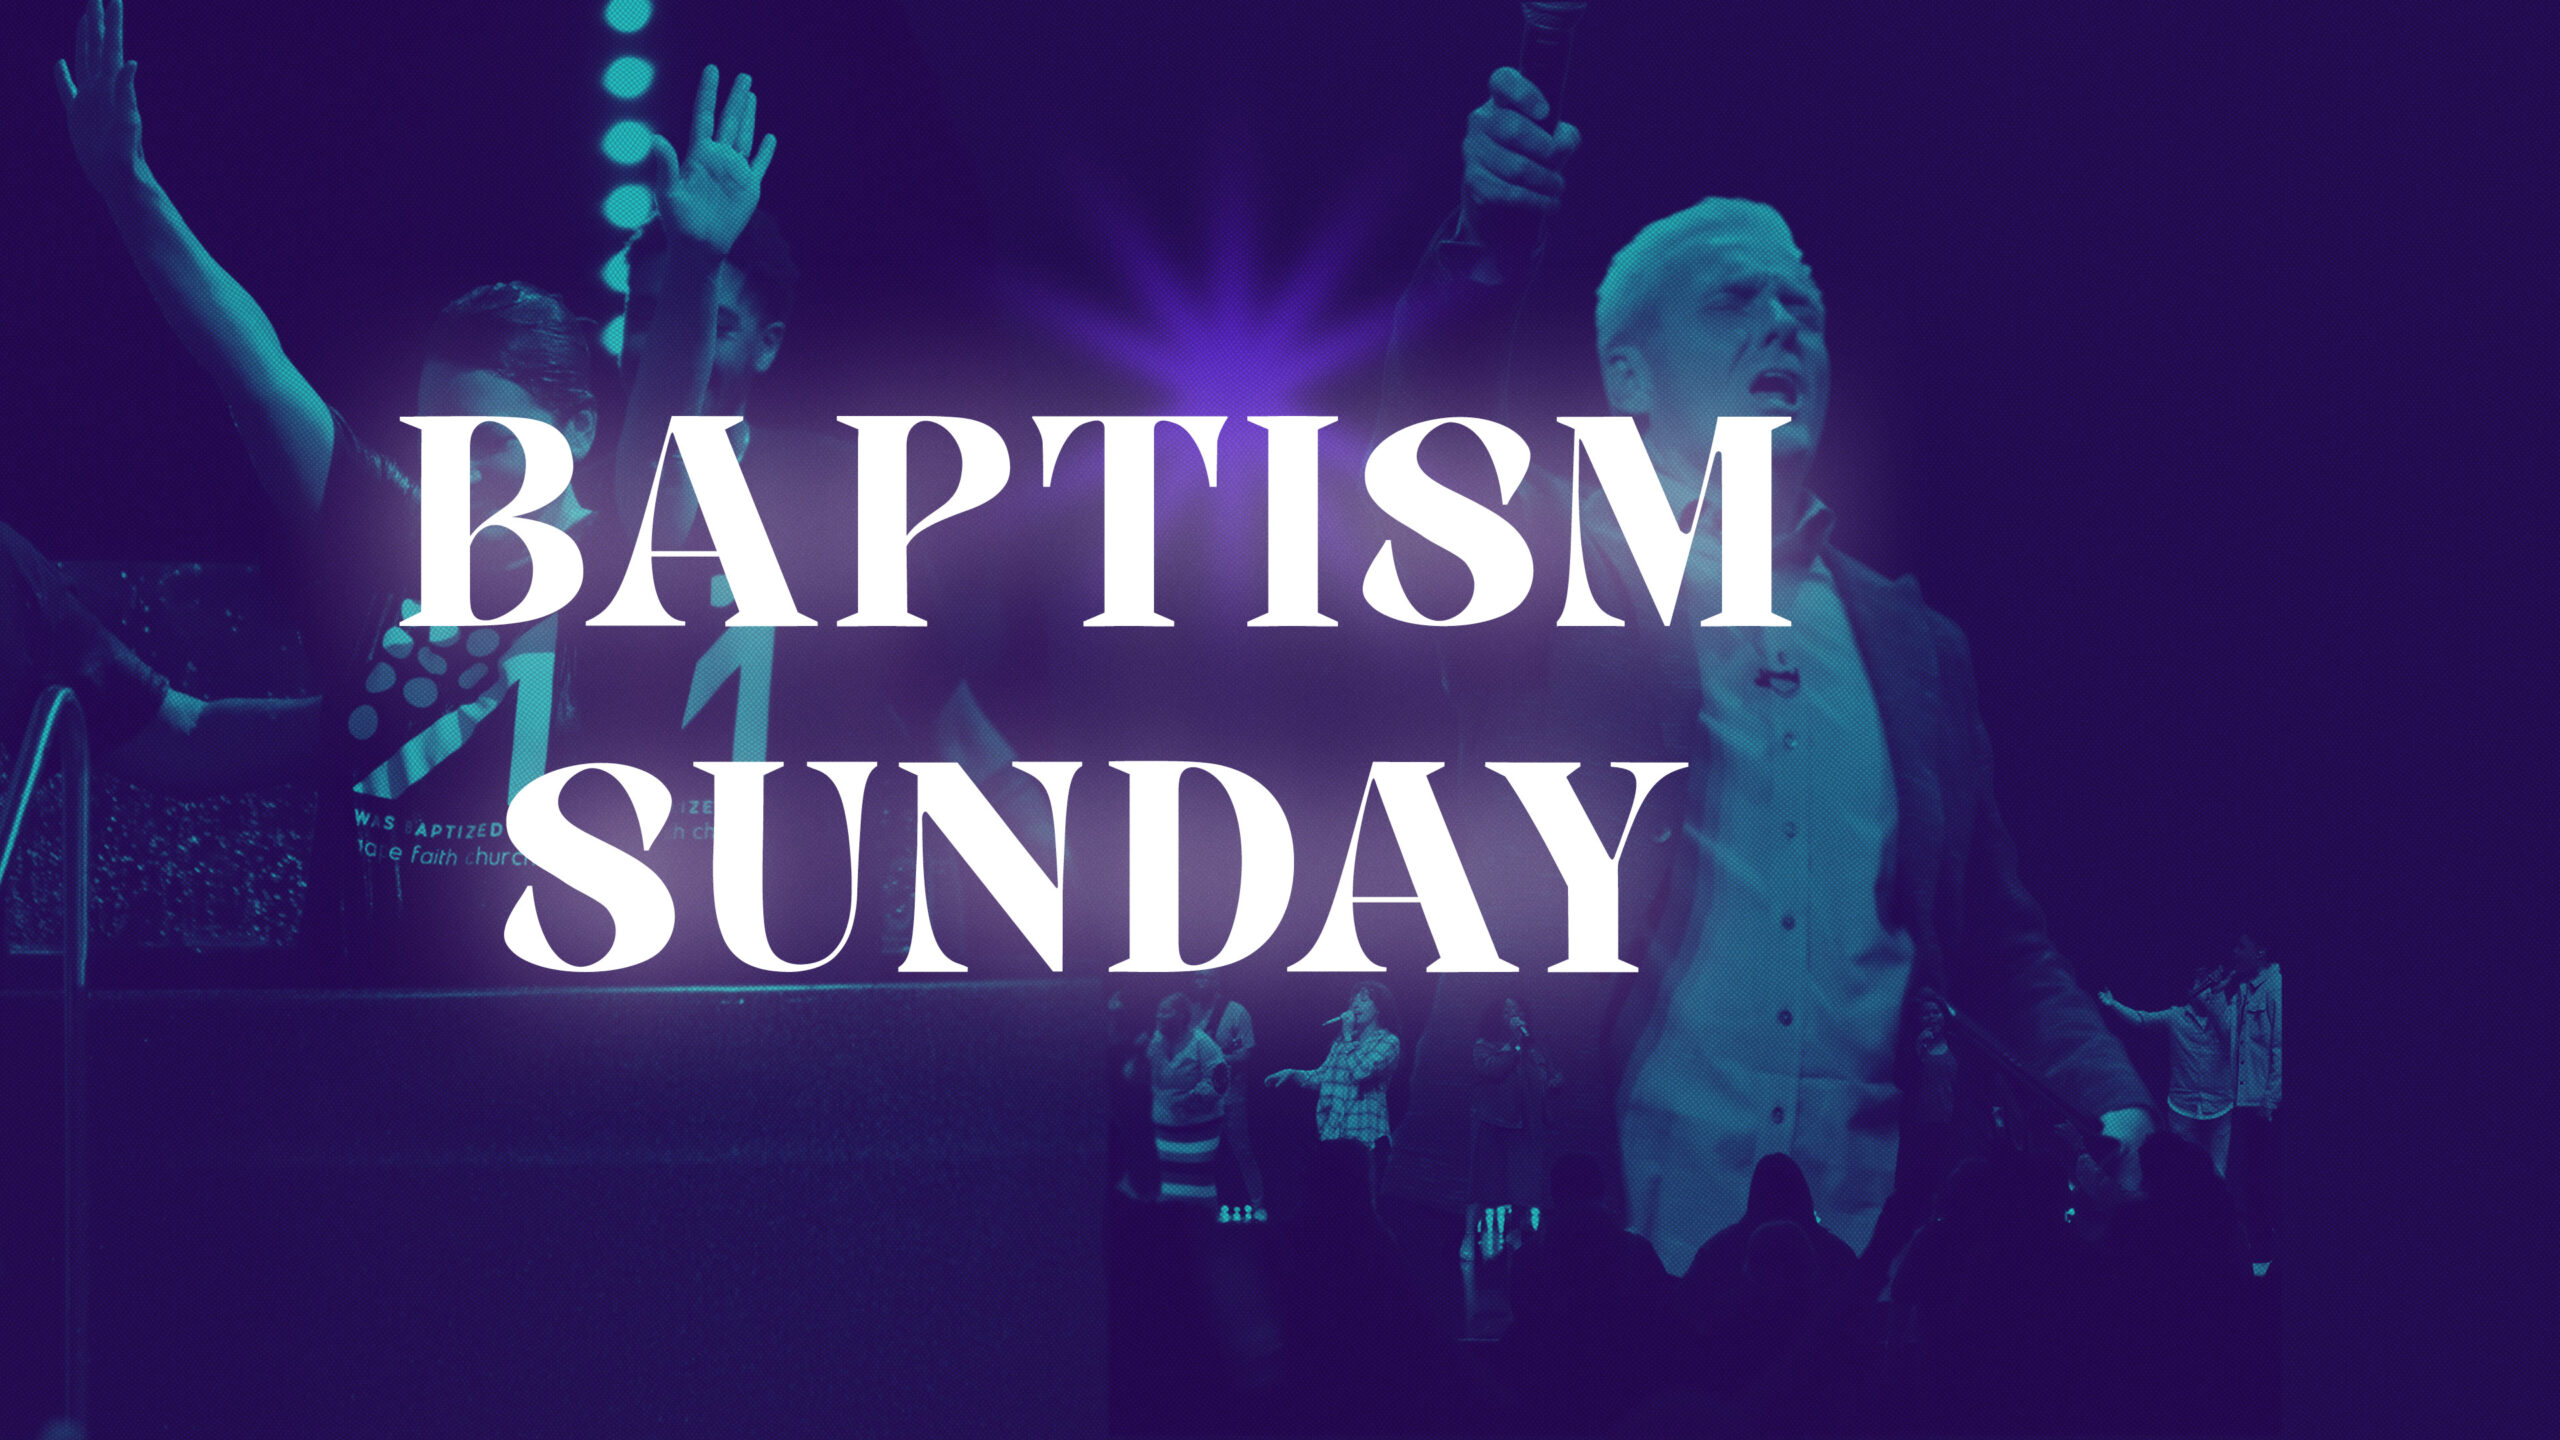 Featured image for “Baptism Sunday”